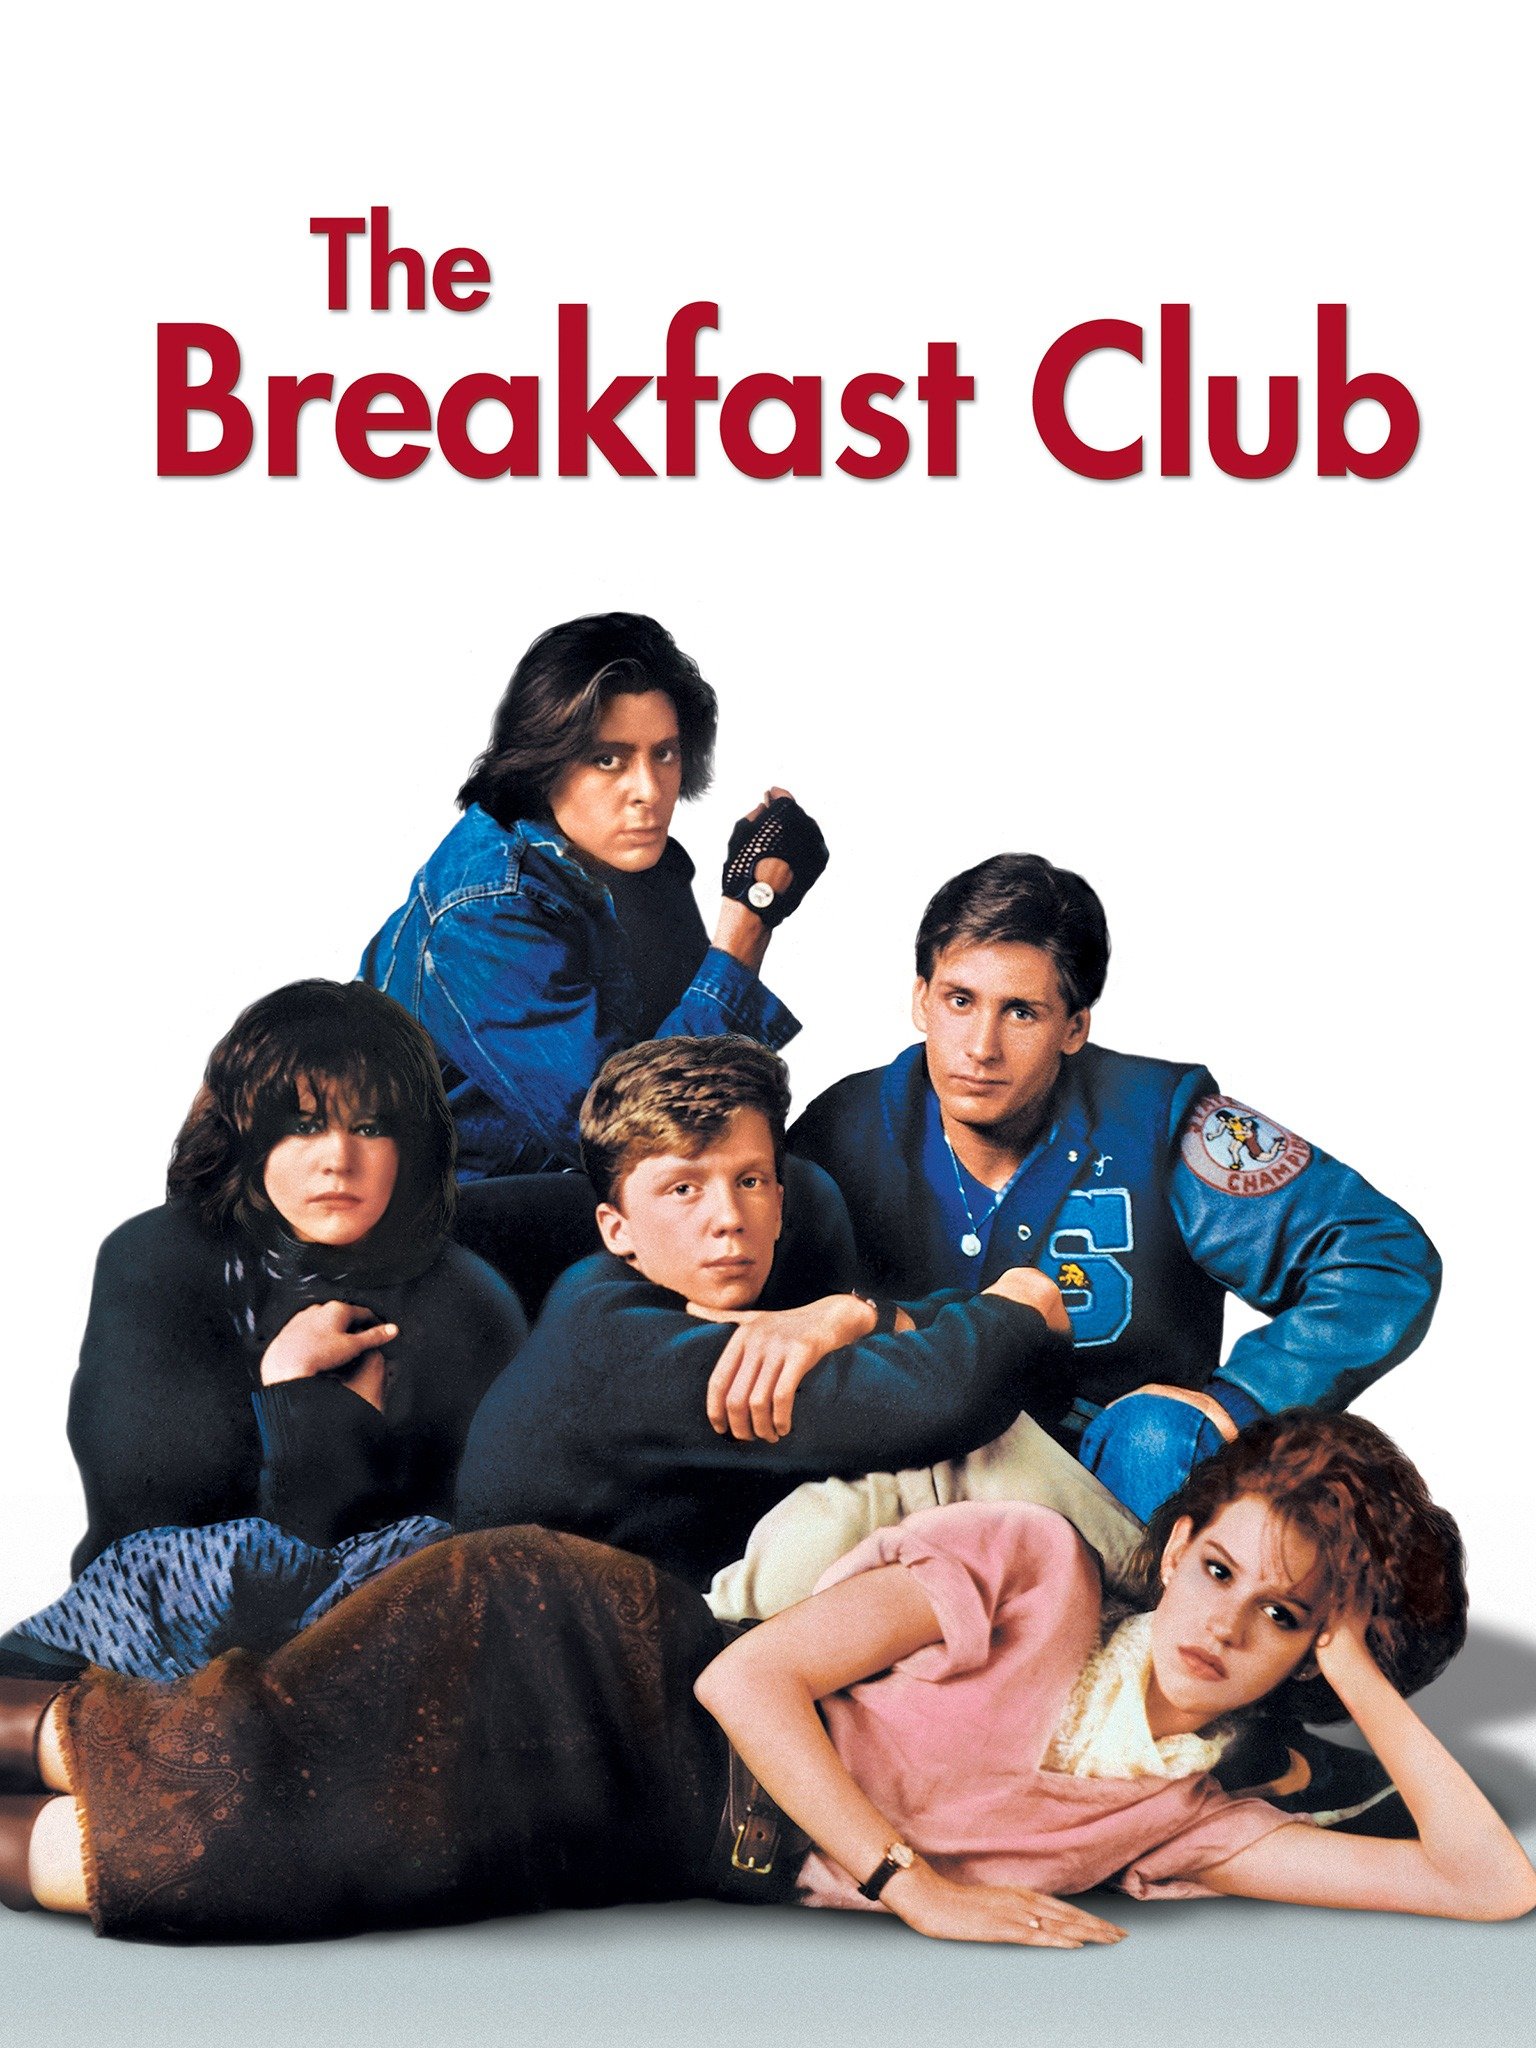 image for the breakfast club